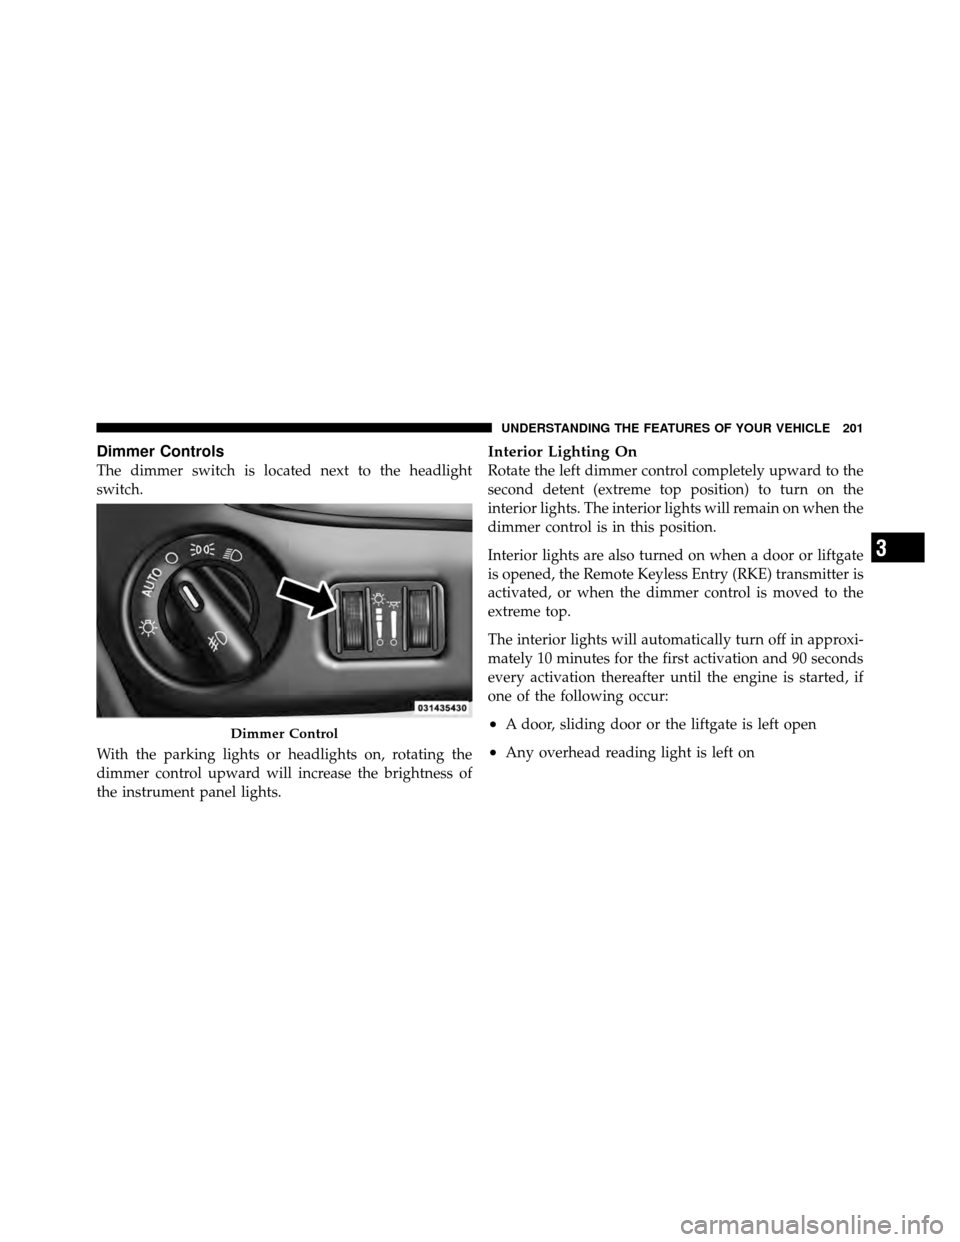 DODGE GRAND CARAVAN 2012 5.G User Guide Dimmer Controls
The dimmer switch is located next to the headlight
switch.
With the parking lights or headlights on, rotating the
dimmer control upward will increase the brightness of
the instrument p